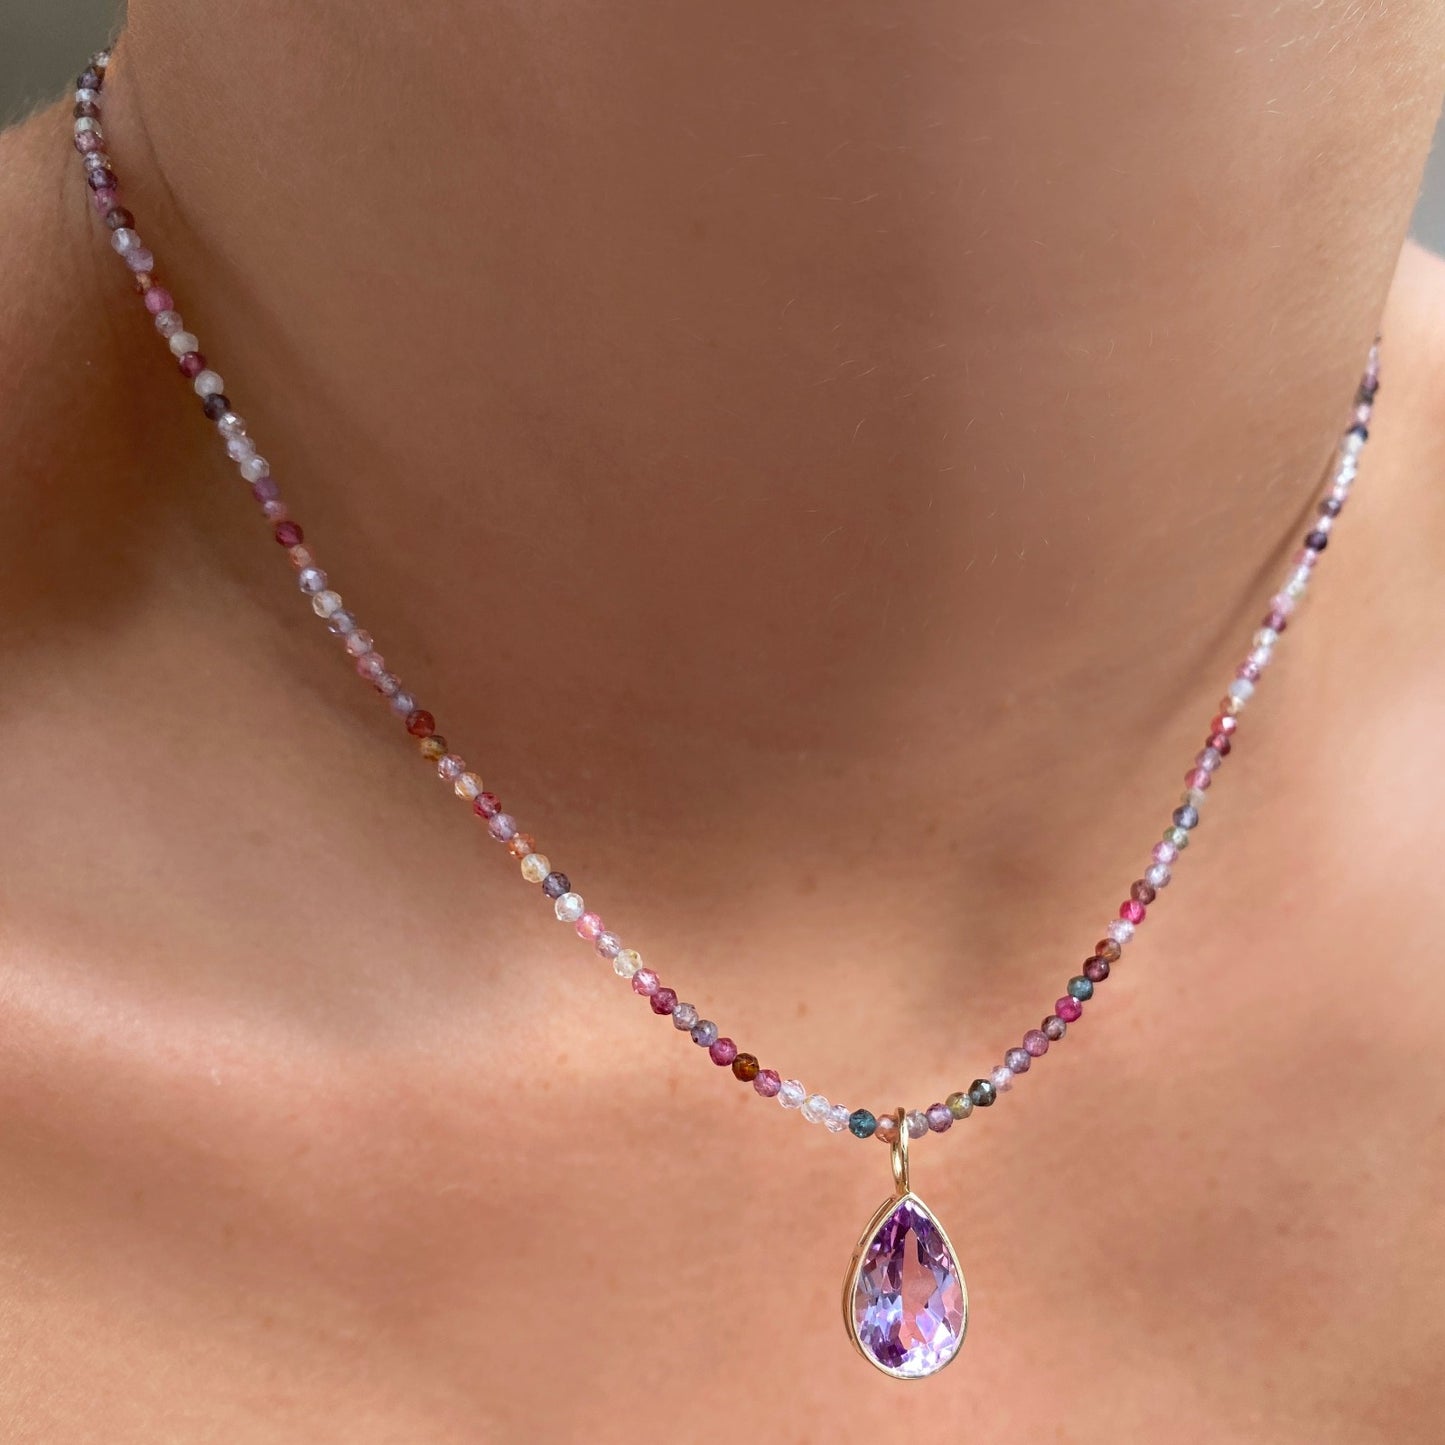 Amethyst Pear Solitaire Charm